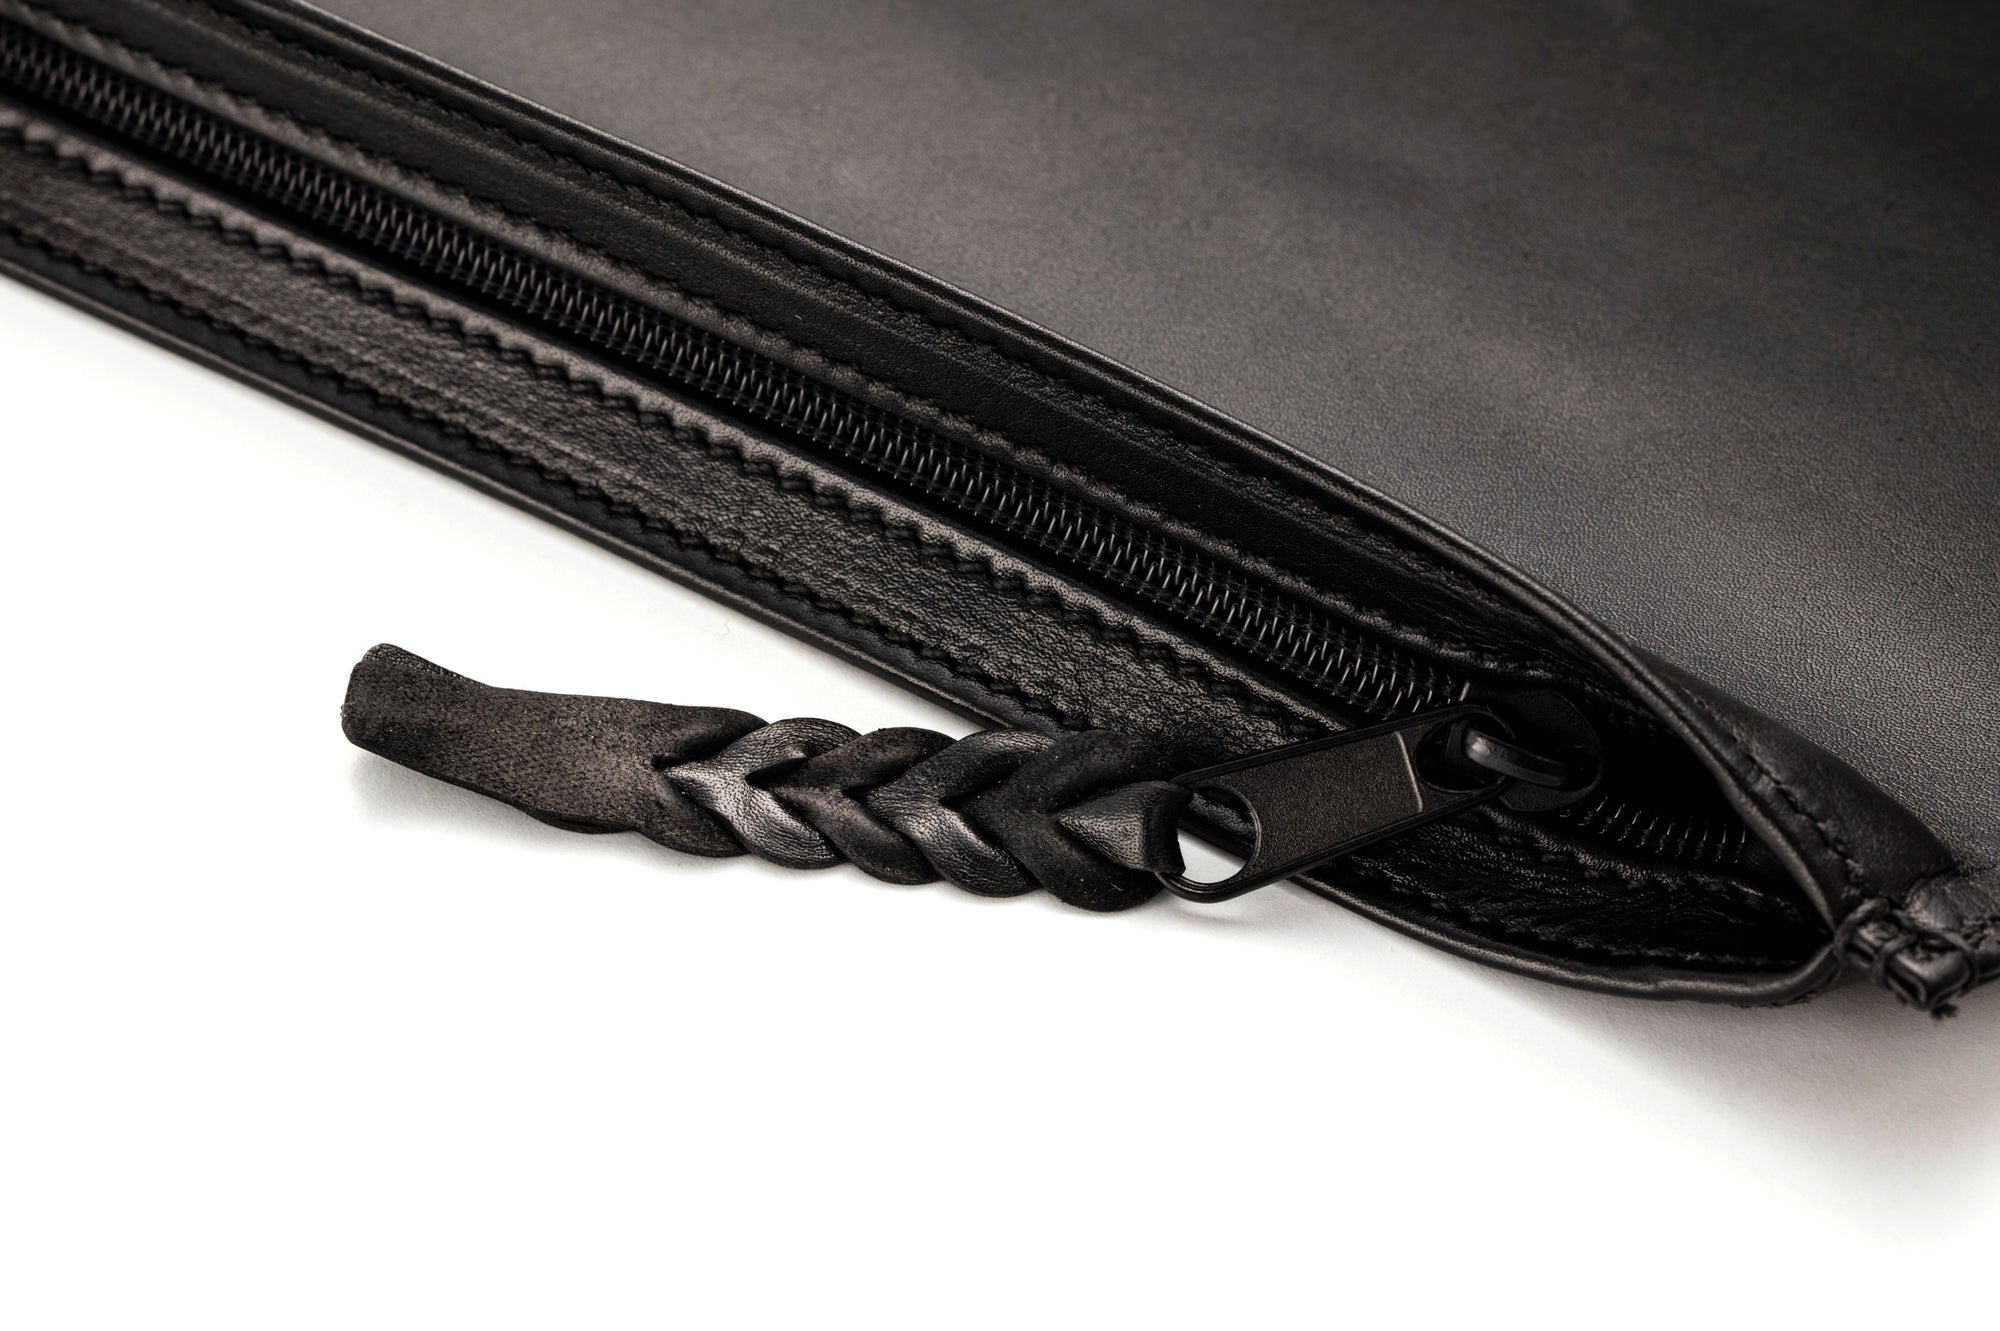 Angus Barrett Kangaroo Leather Document and Tablet Case in Black Matte